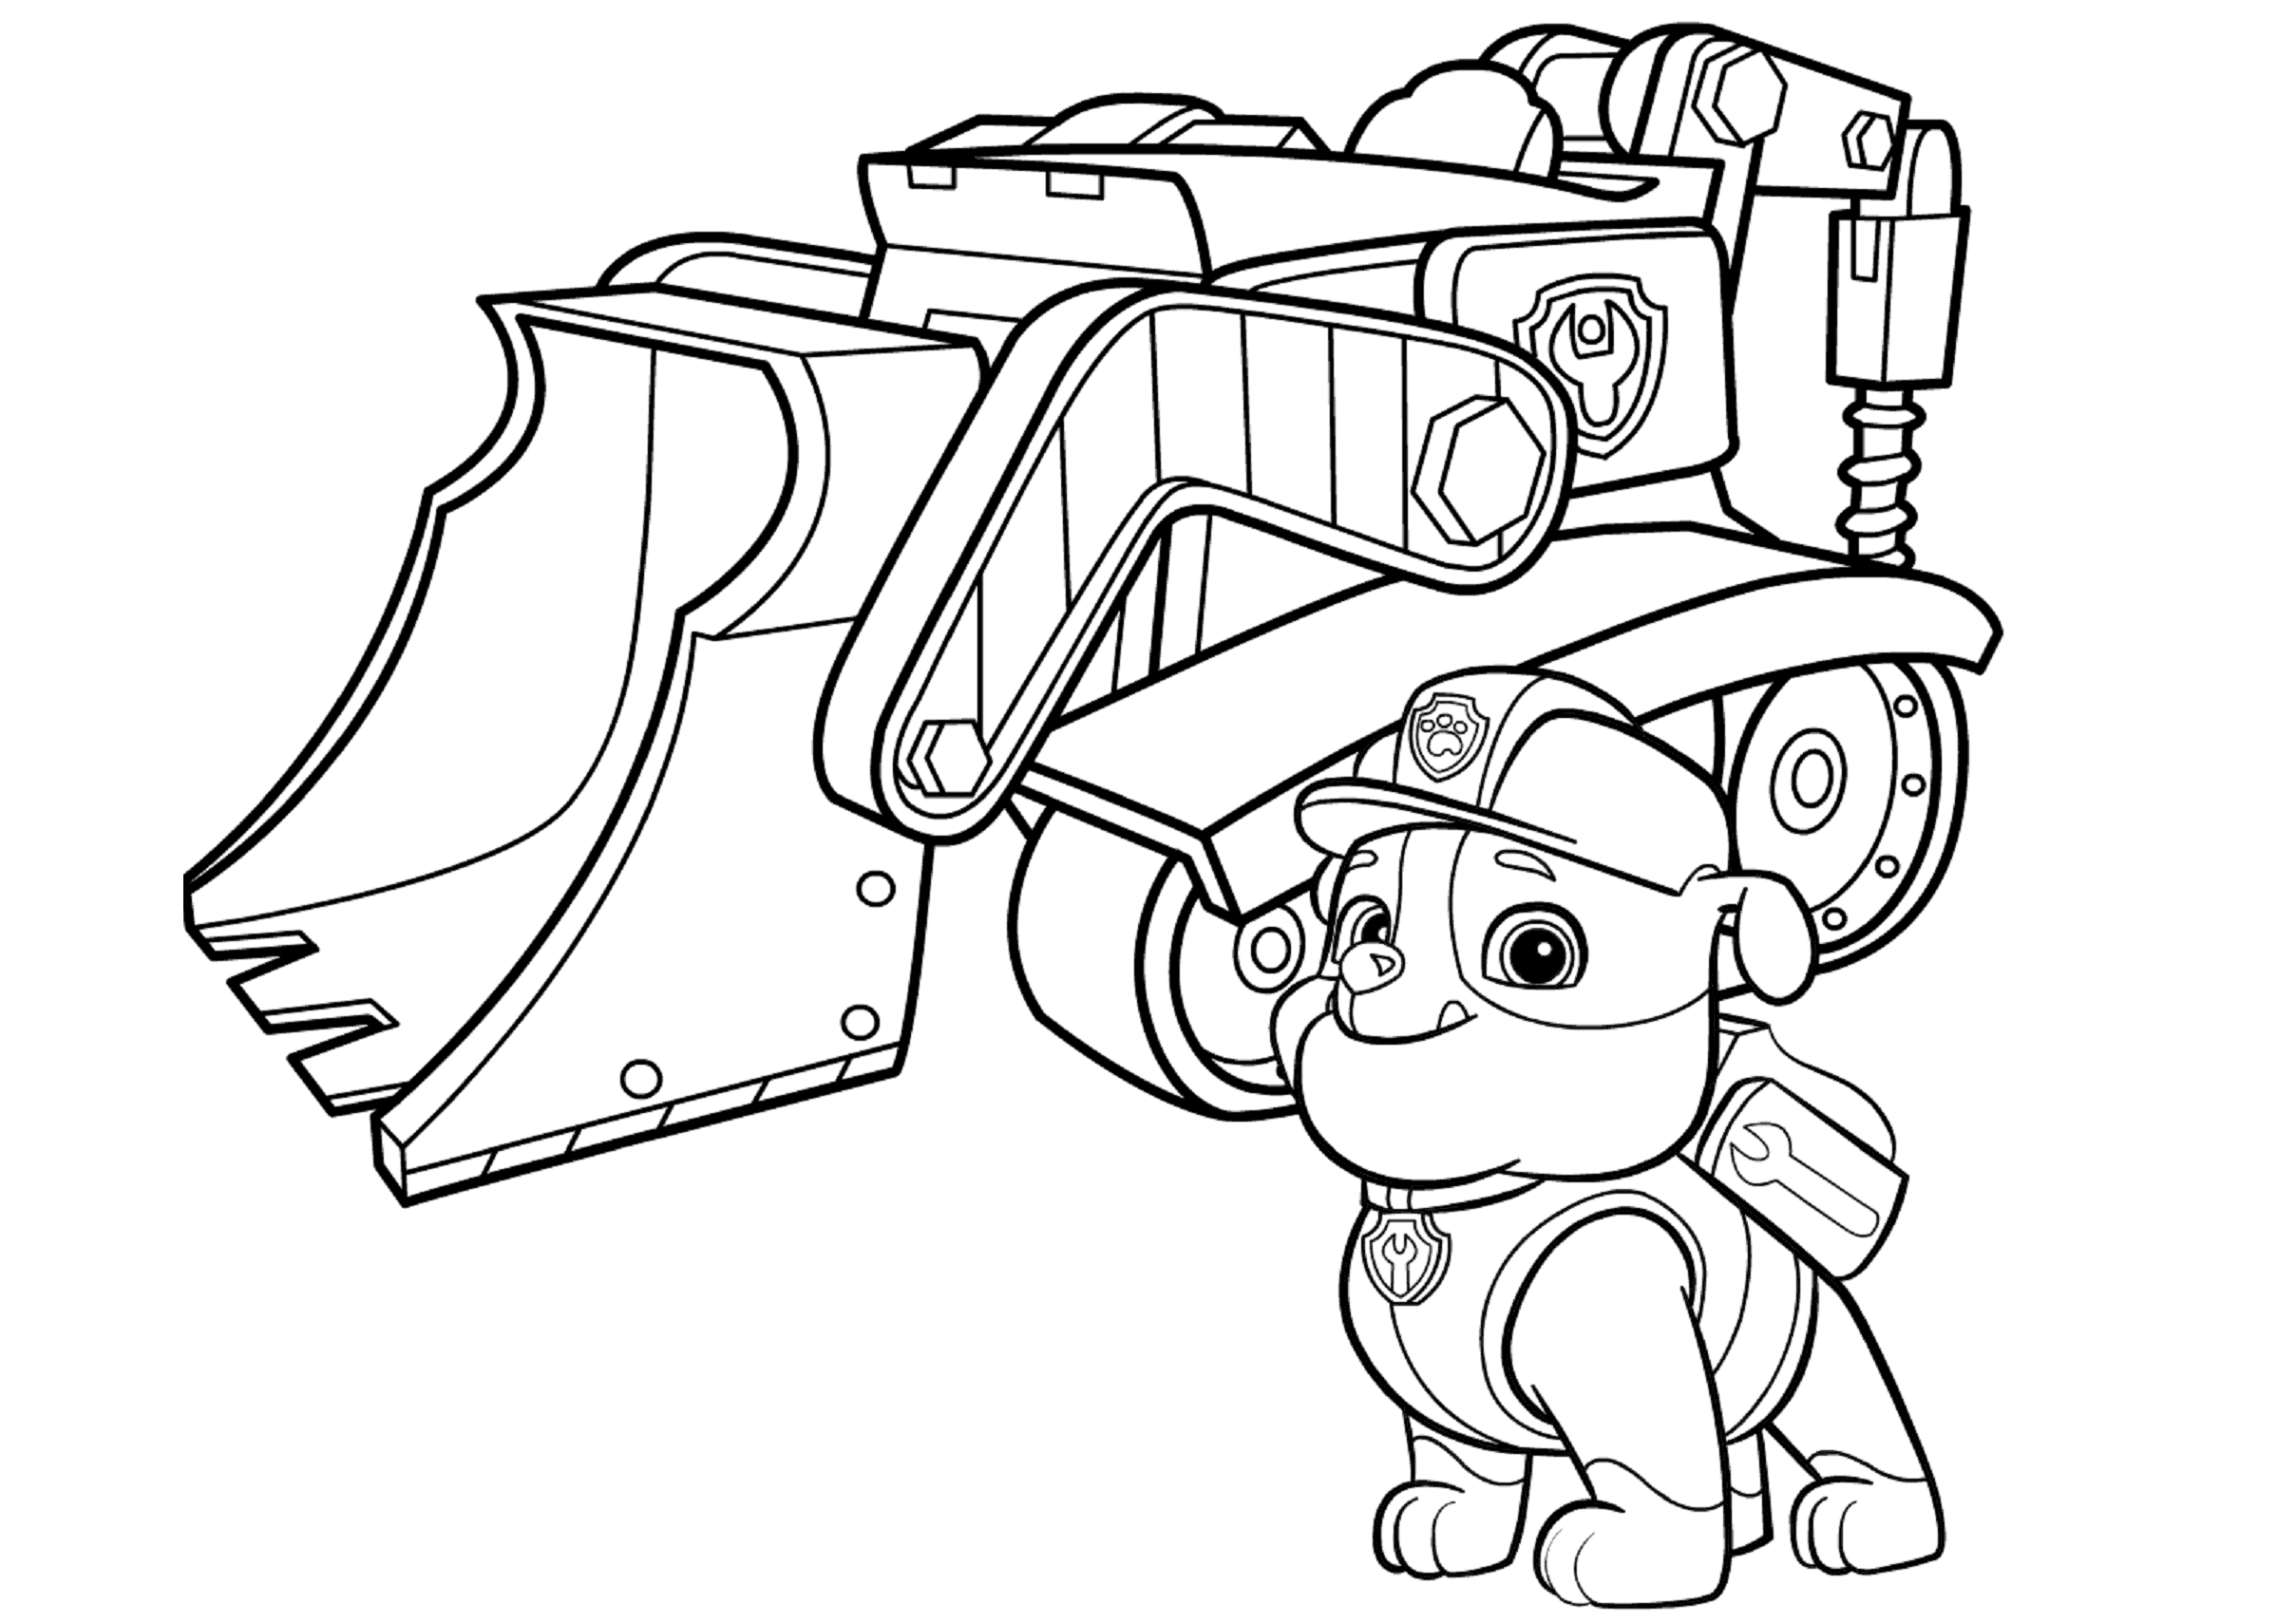 Paw Patrol Rubbles Bulldozer Paw Patrol Coloring Pages   Coloring Cool